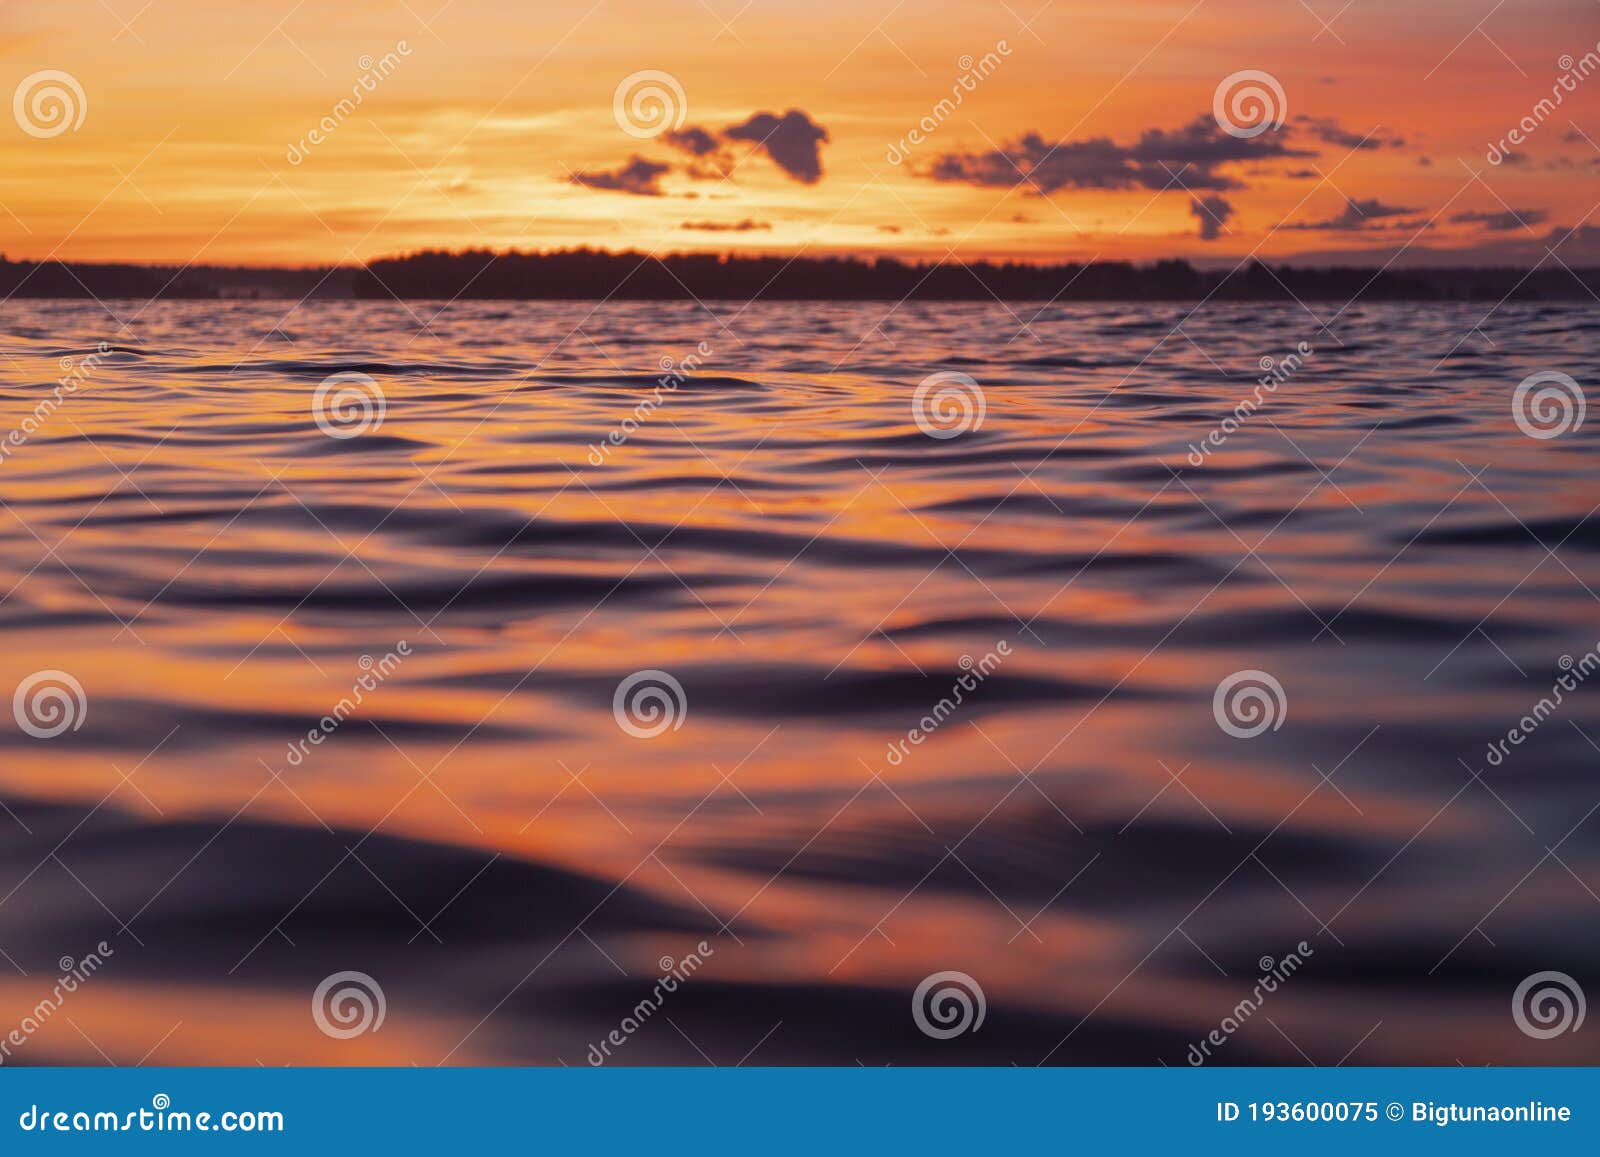 Water Surface View Of A Sunset Sky Background Dramatic Gold Sunset